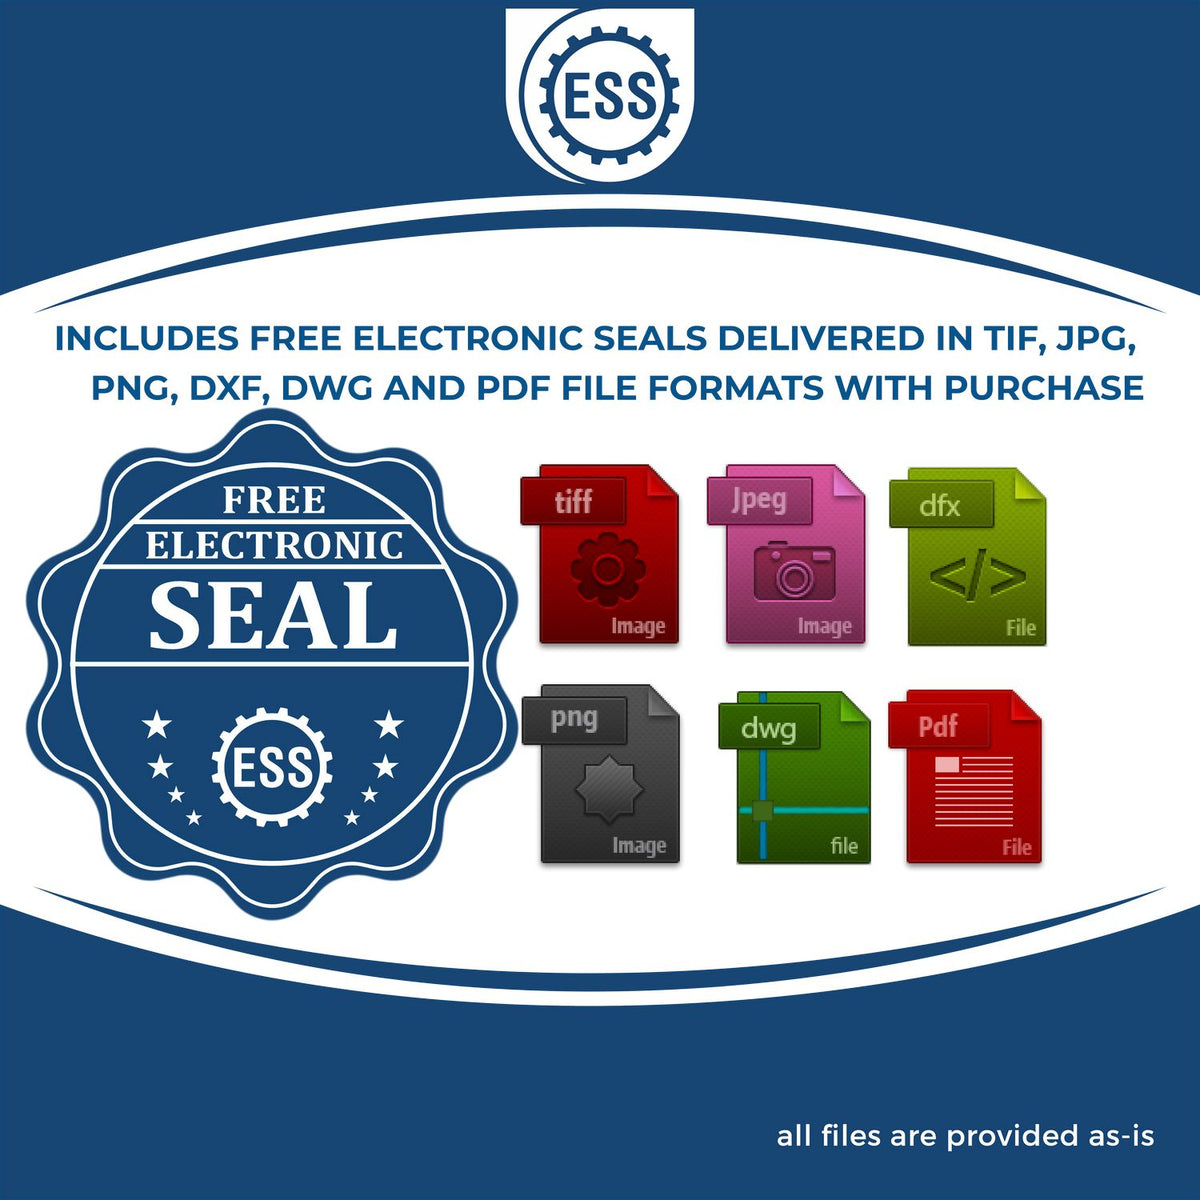 An infographic for the free electronic seal for the Slim Pre-Inked Kansas Land Surveyor Seal Stamp illustrating the different file type icons such as DXF, DWG, TIF, JPG and PNG.